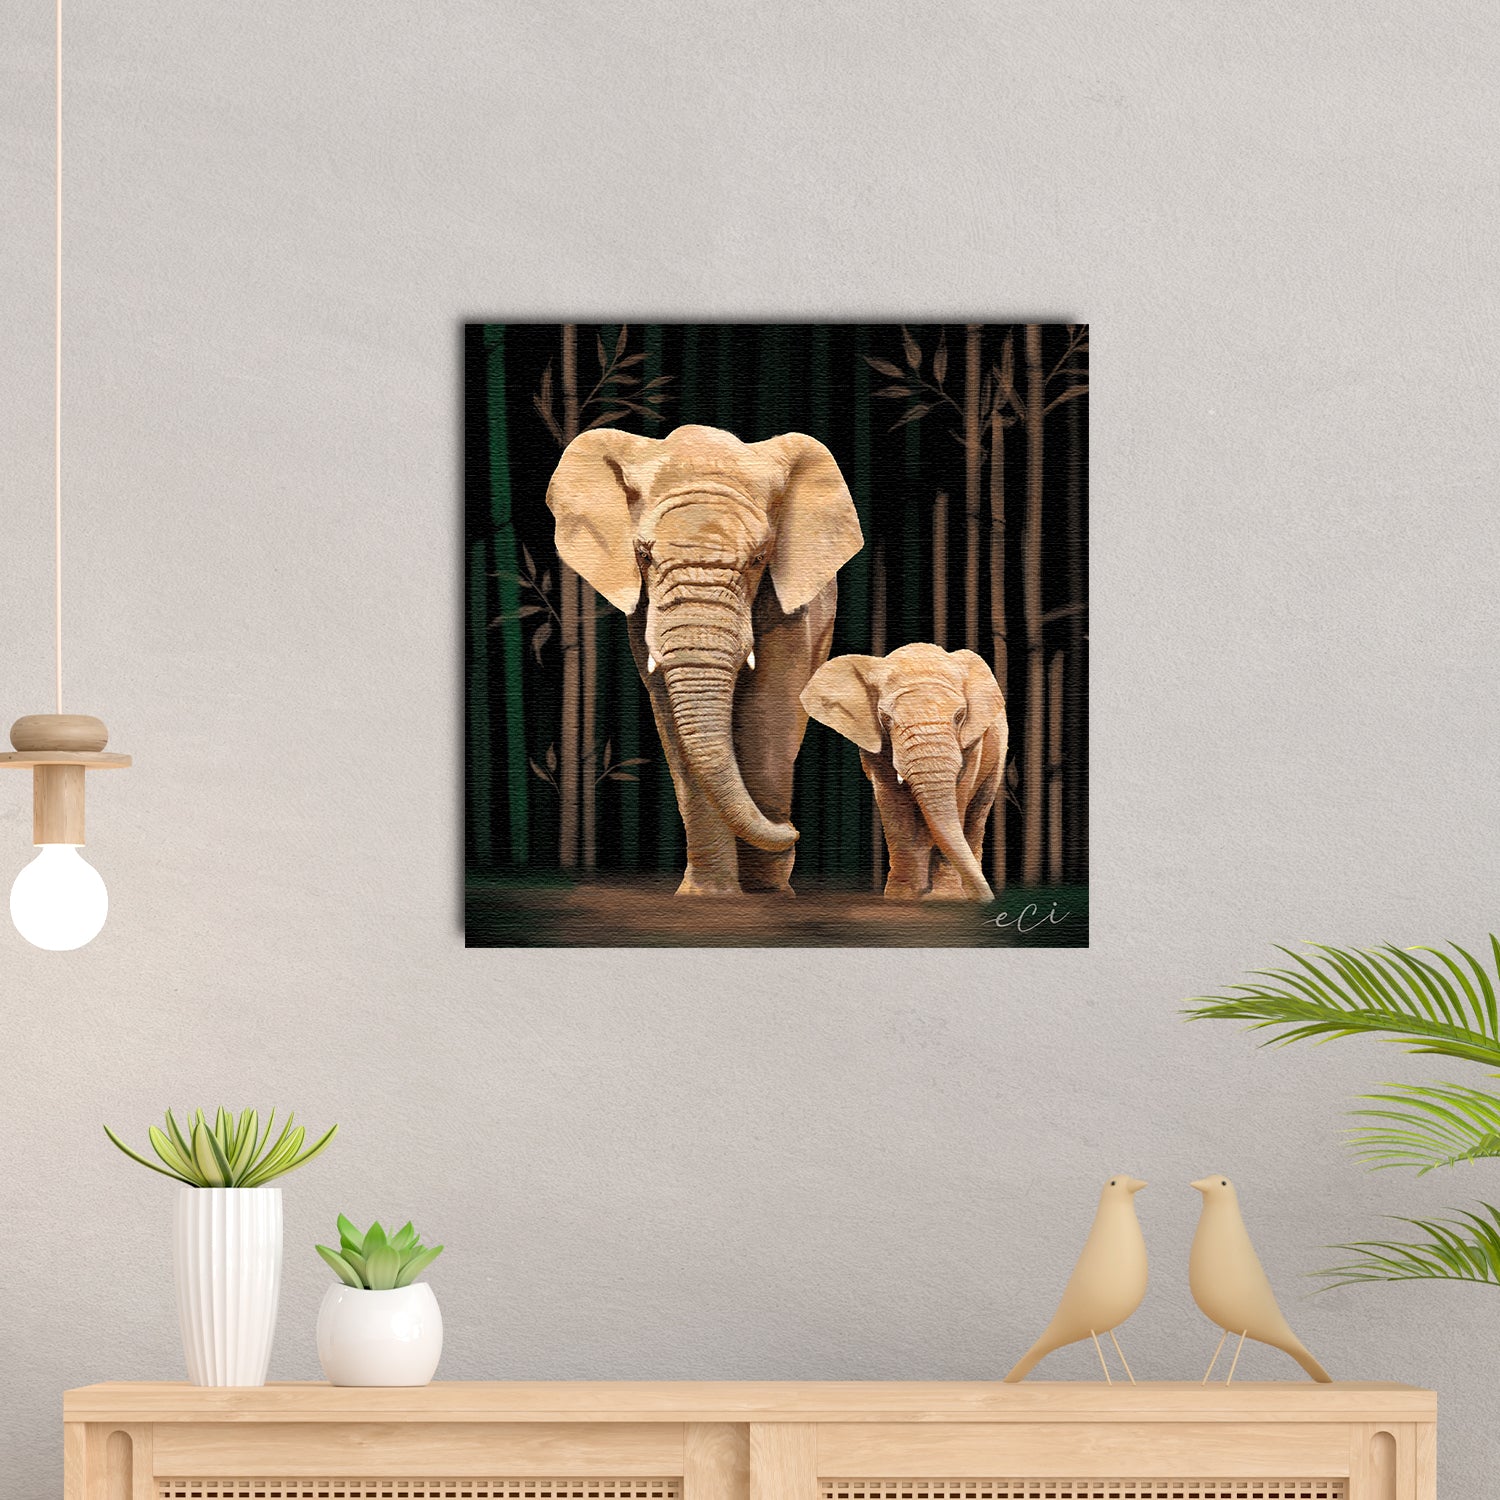 Elephant With Baby Elephant Canvas Painting Digital Printed Animal Wall Art 1